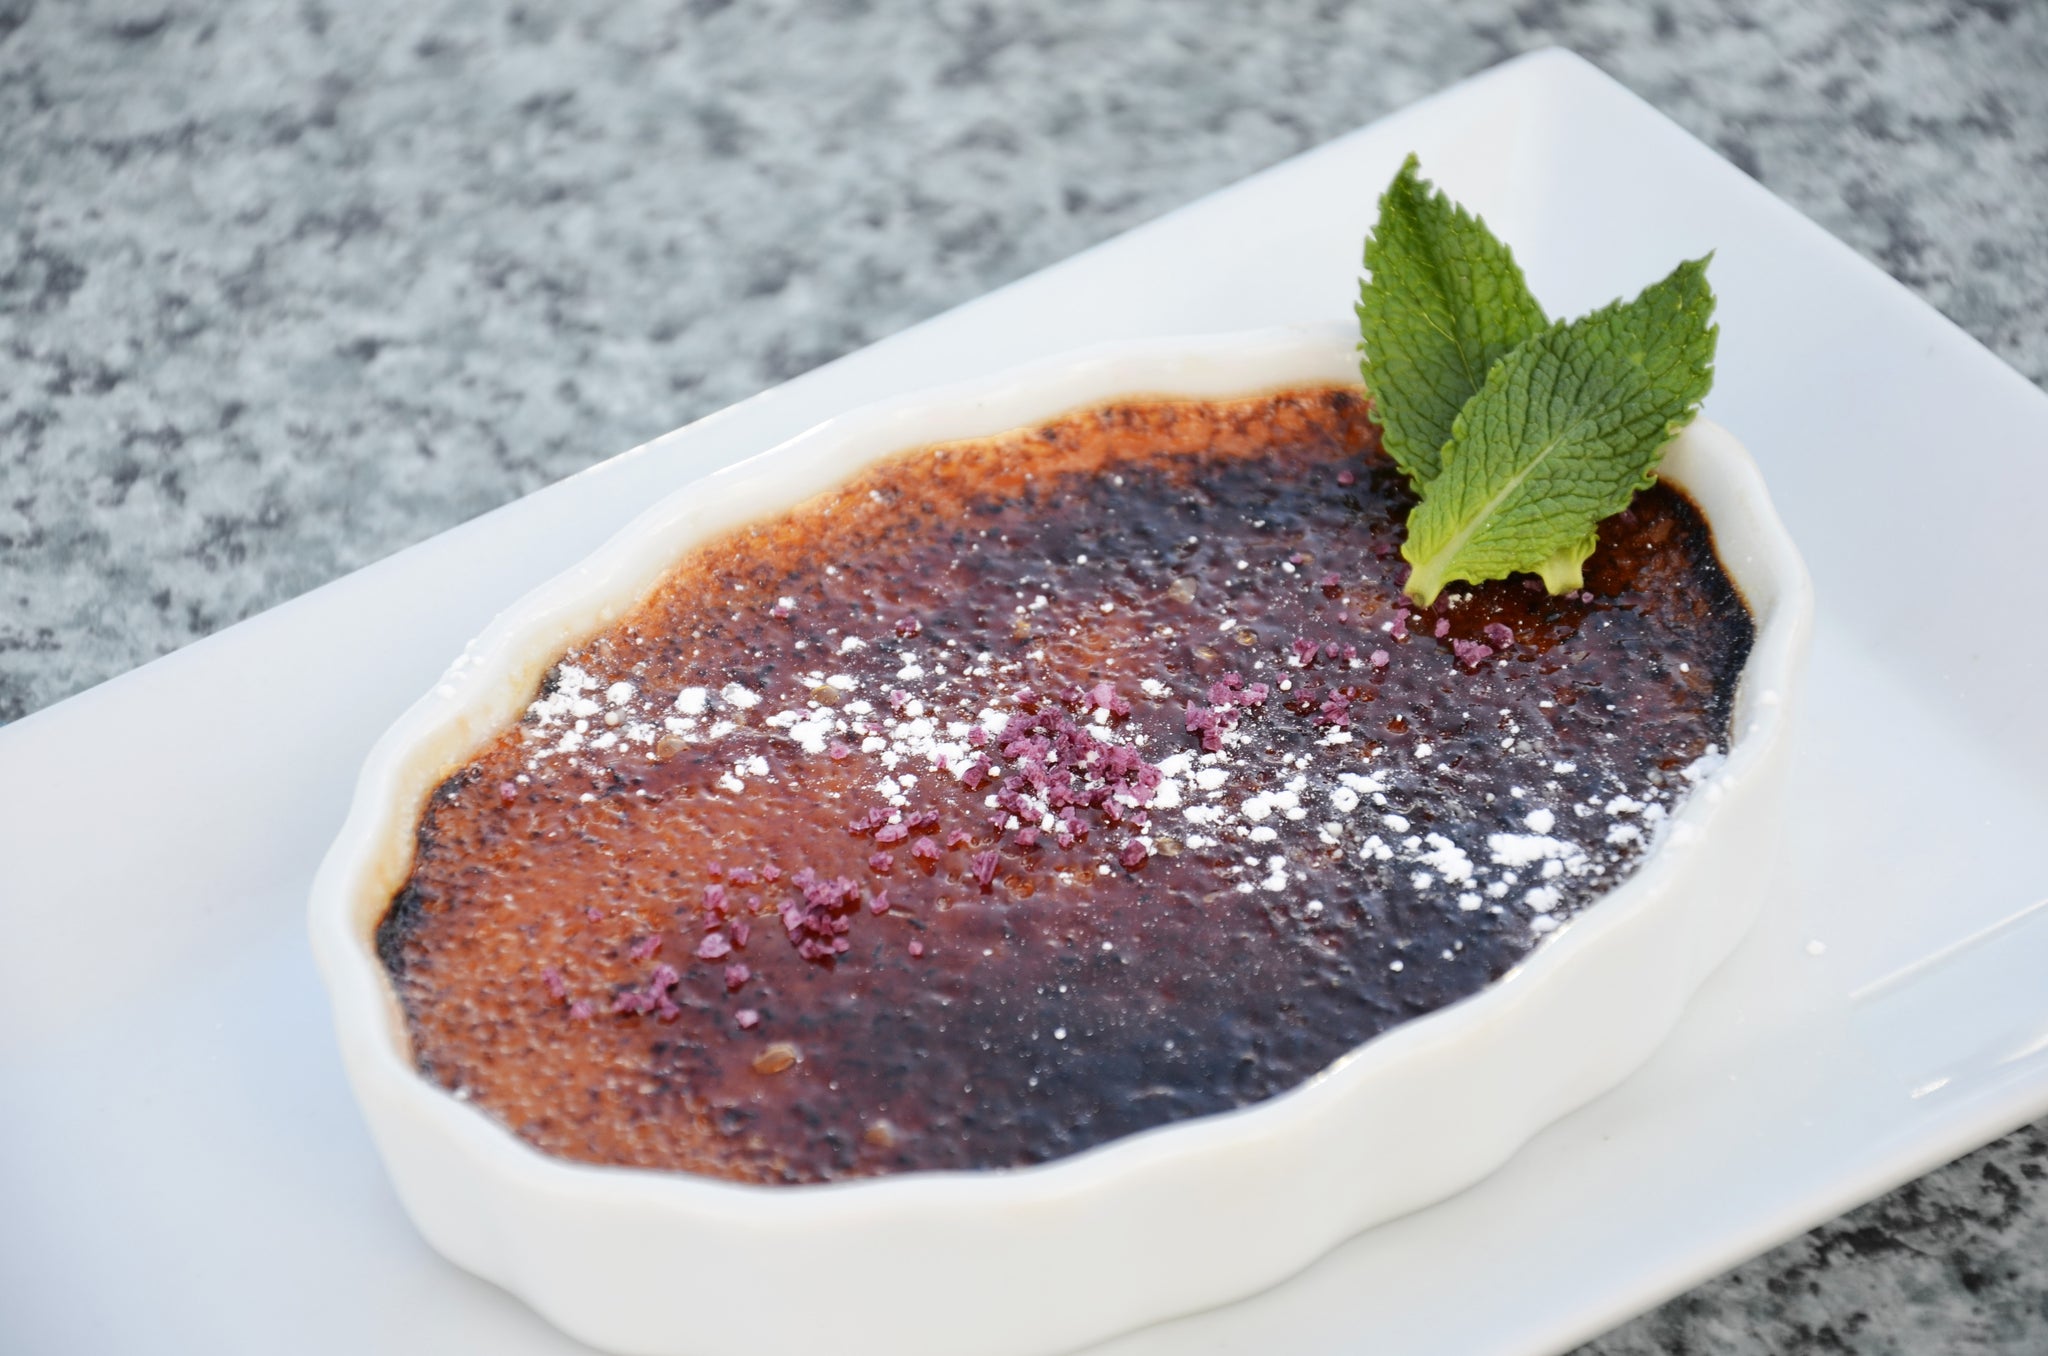 Pumpkin & Ginger Creme Brûlée May Become Your Fall Favorite